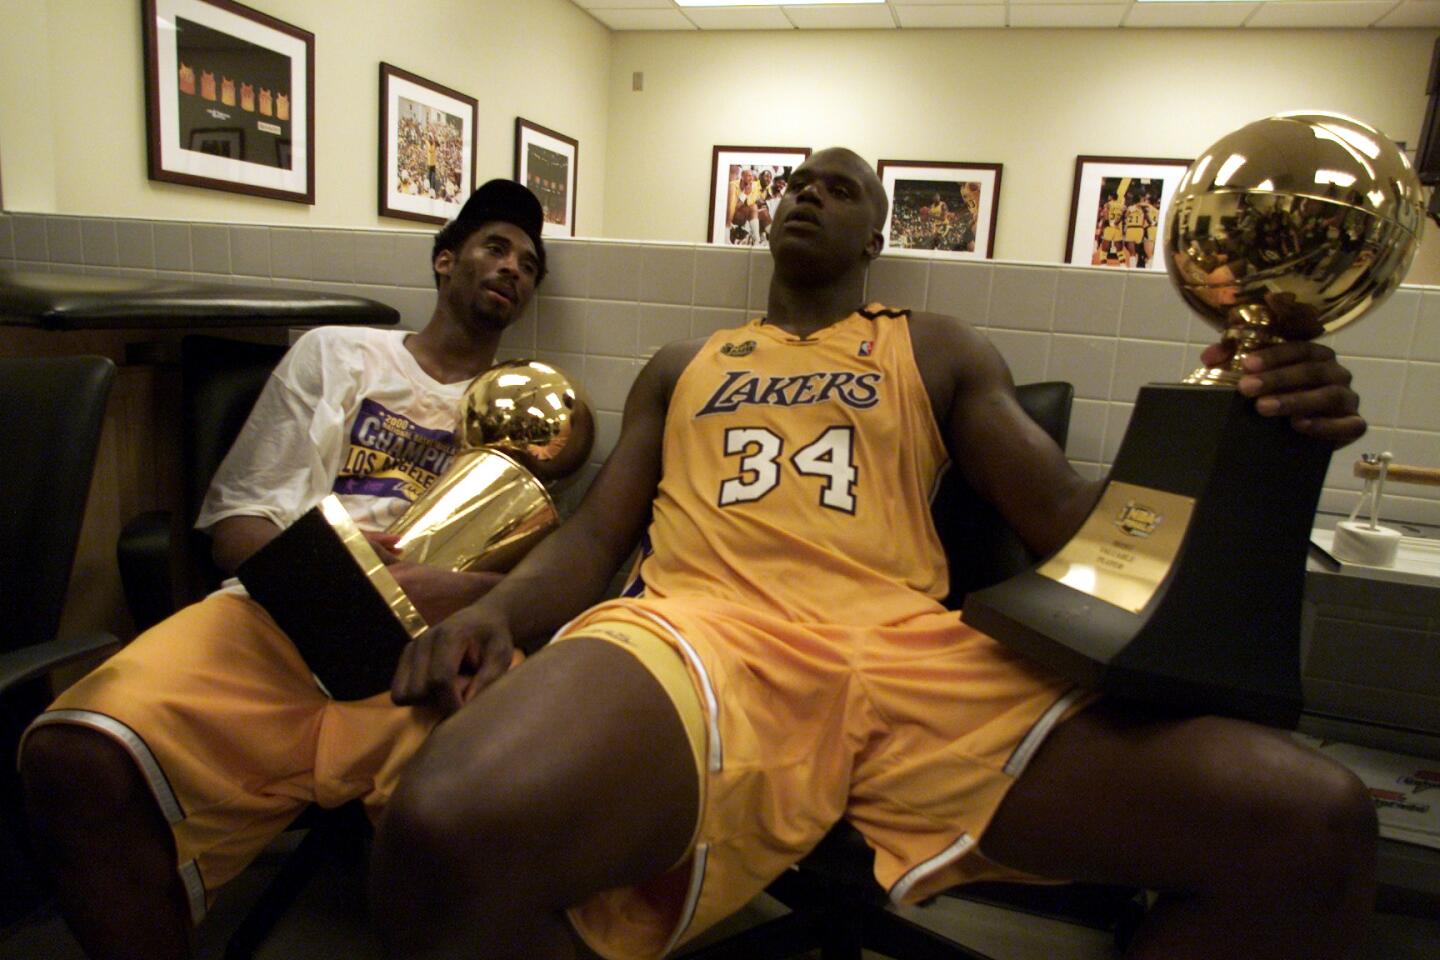 Kobe Bryant, left, and Shaquille O'Neal sit after winning their first title, holding the championship and Finals MVP trophies, respectively.